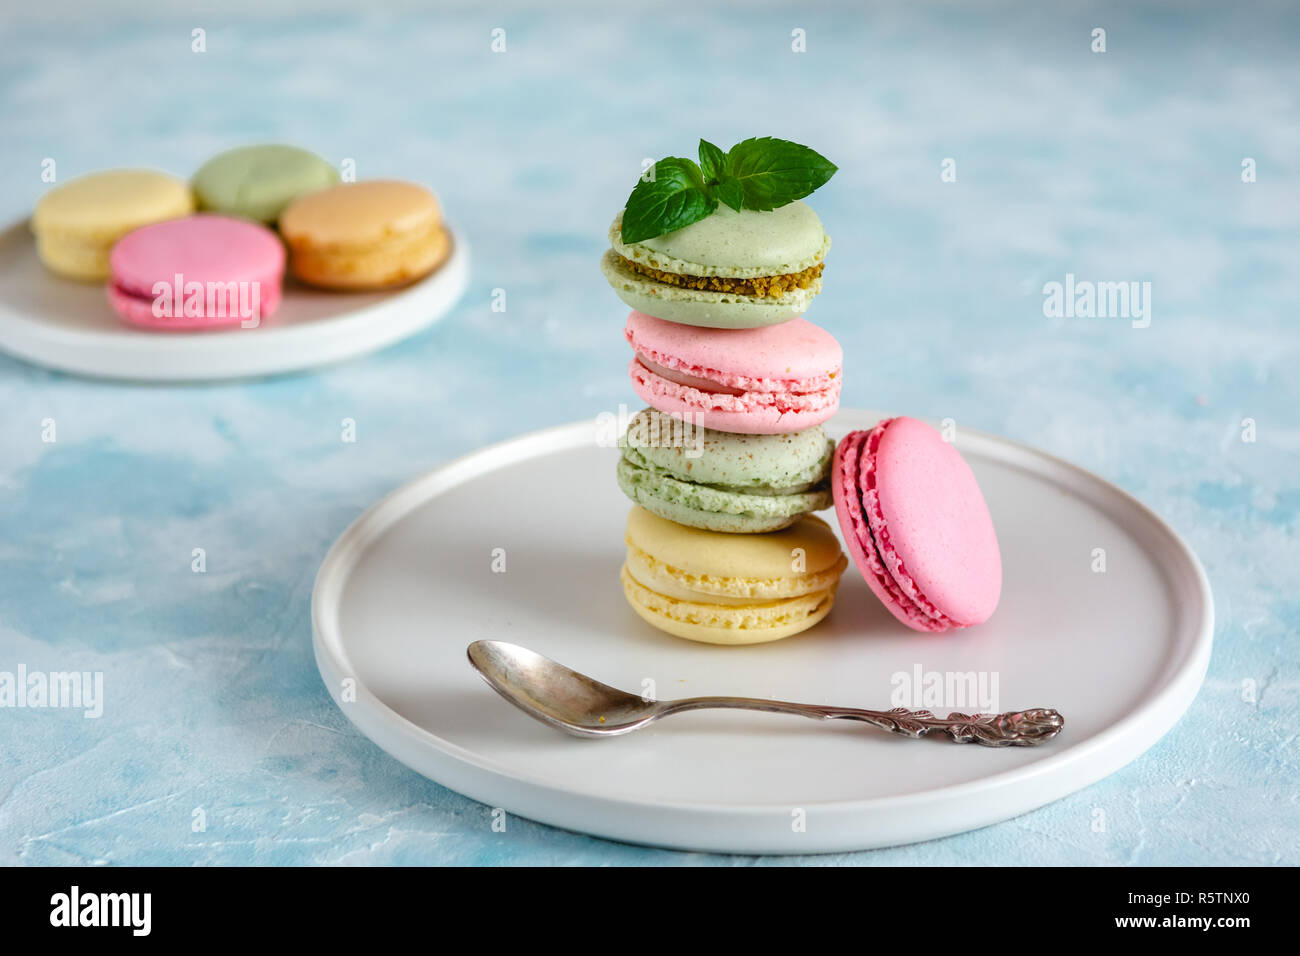 Colorful macarons cakes. Small French cakes. Sweet and colorful french macaroons. Stock Photo